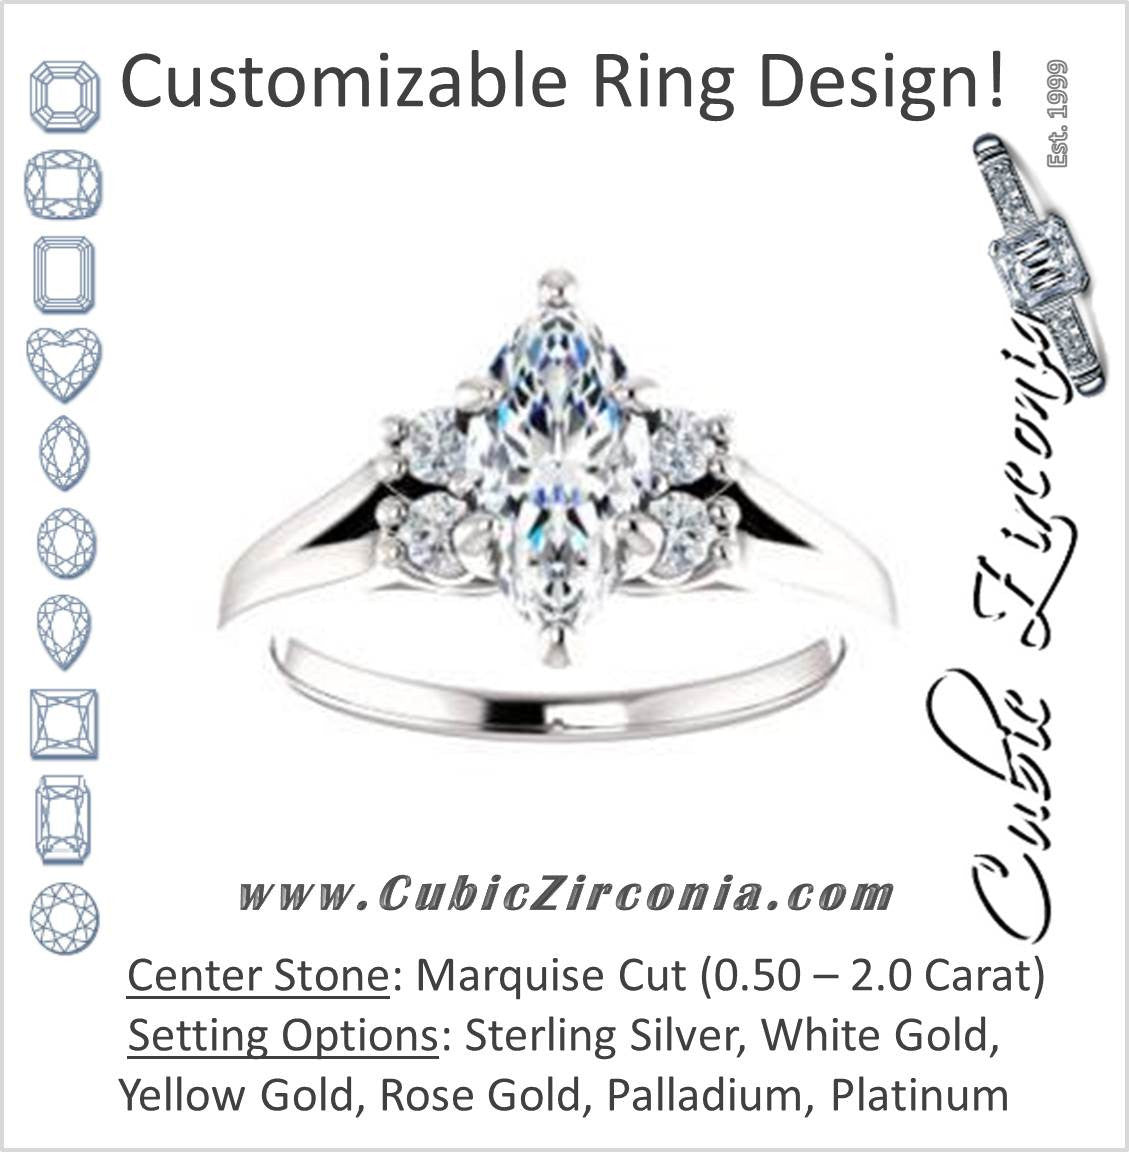 Cubic Zirconia Engagement Ring- The Bianca (Customizable 5-stone Cluster Style with Marquise Cut Center)